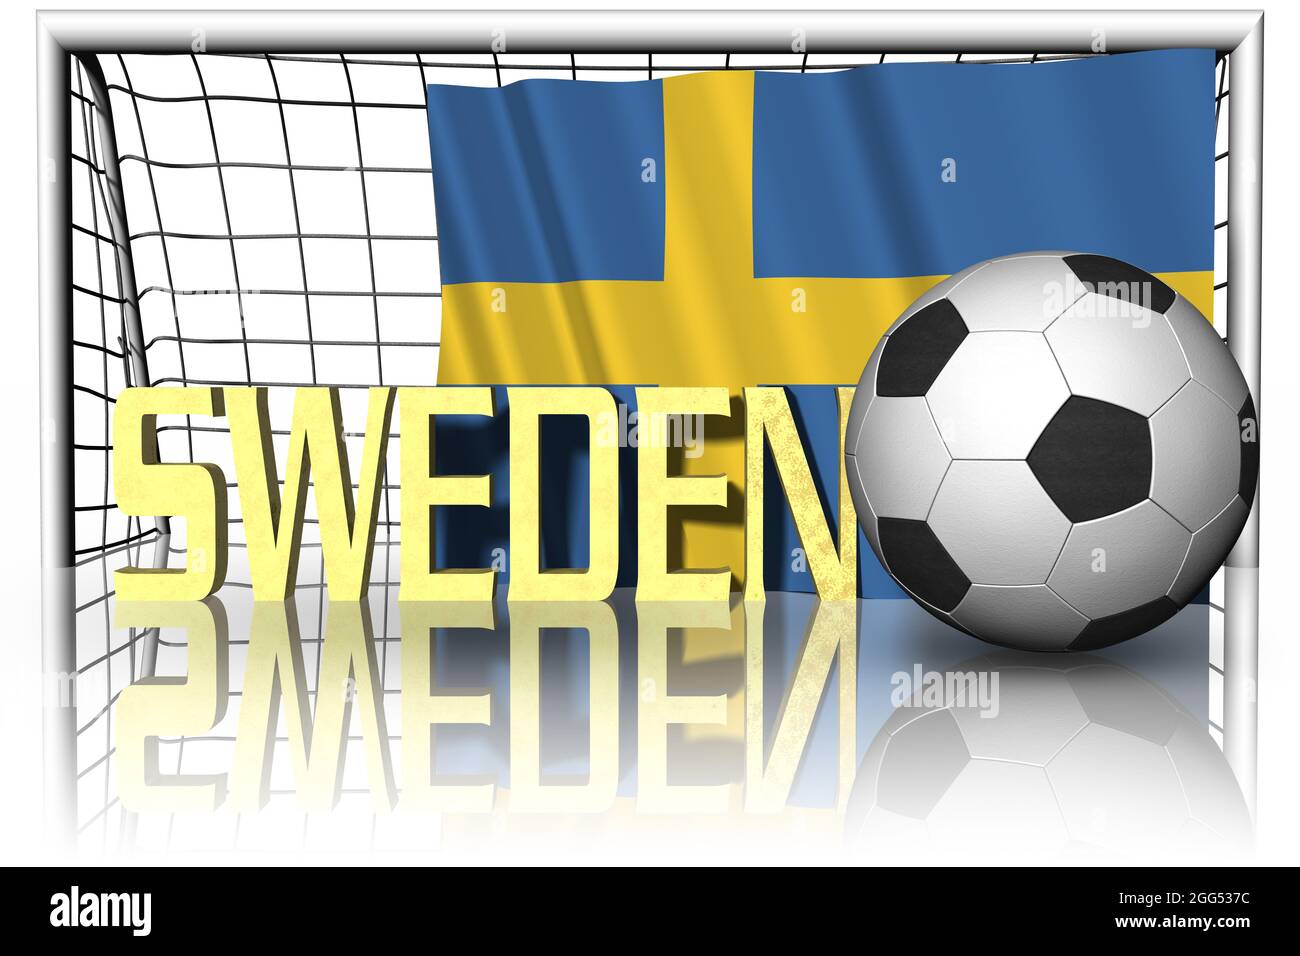 Sweden. National flag with soccer ball in the foreground. Sport football - 3D Illustration Stock Photo